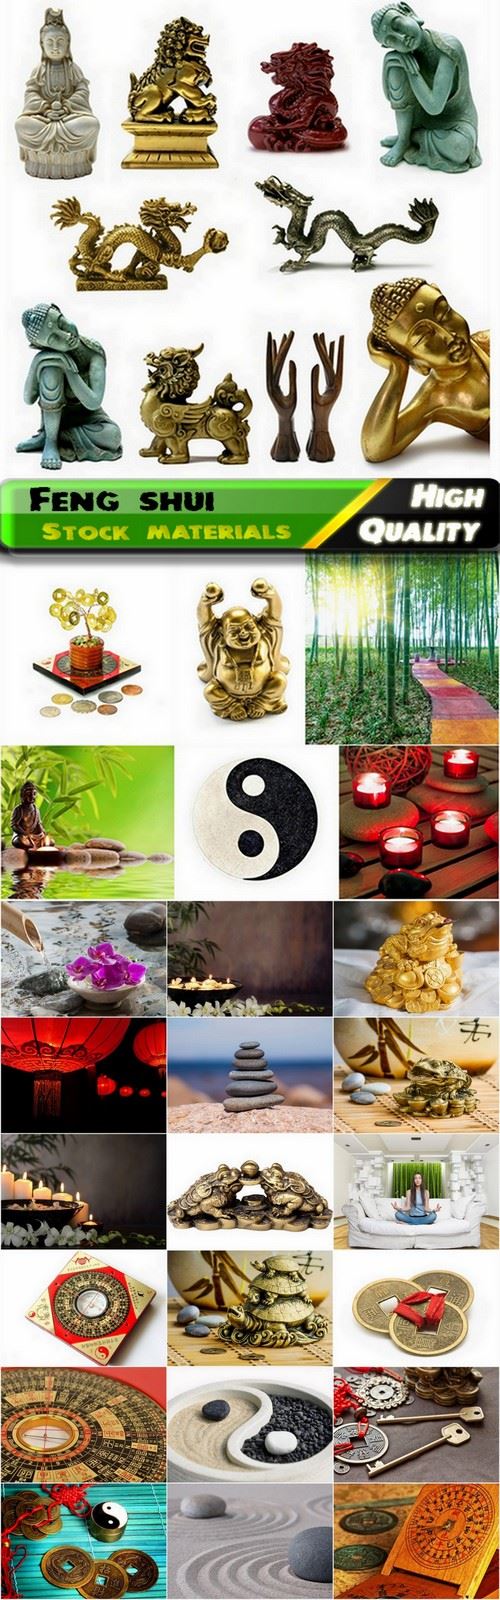 China Zen and feng shui Stock images - 25 HQ Jpg